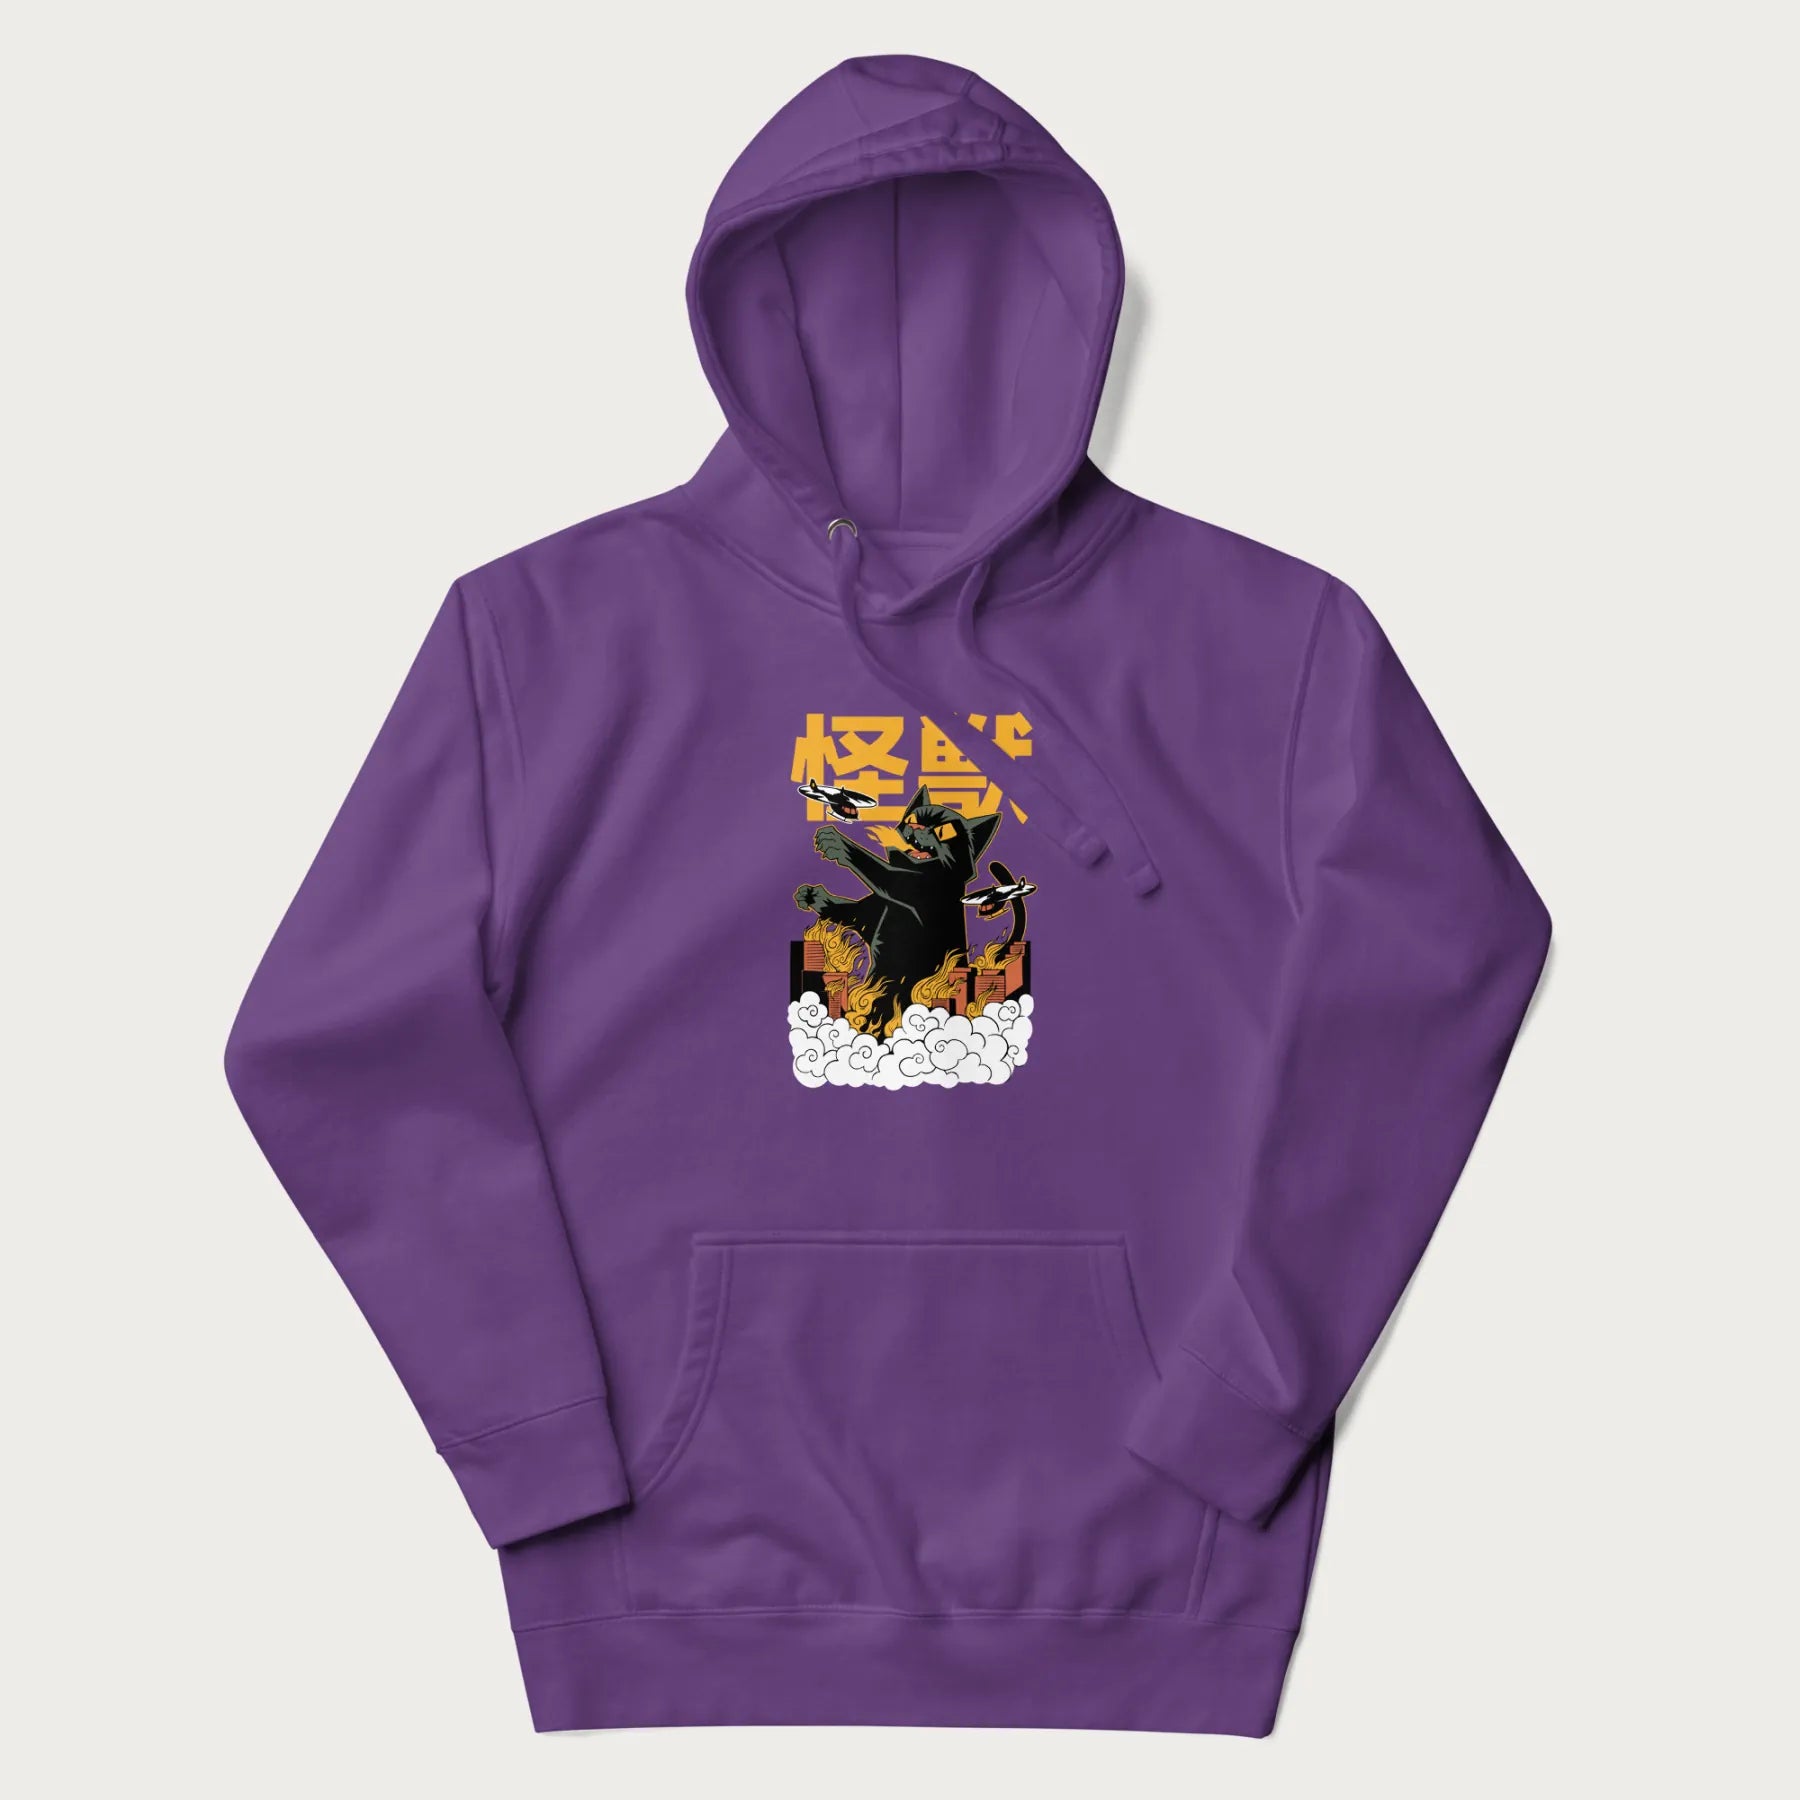 Purple hoodie with graphic of a 'Kaiju Cat' with helicopters and flames in a burning city.